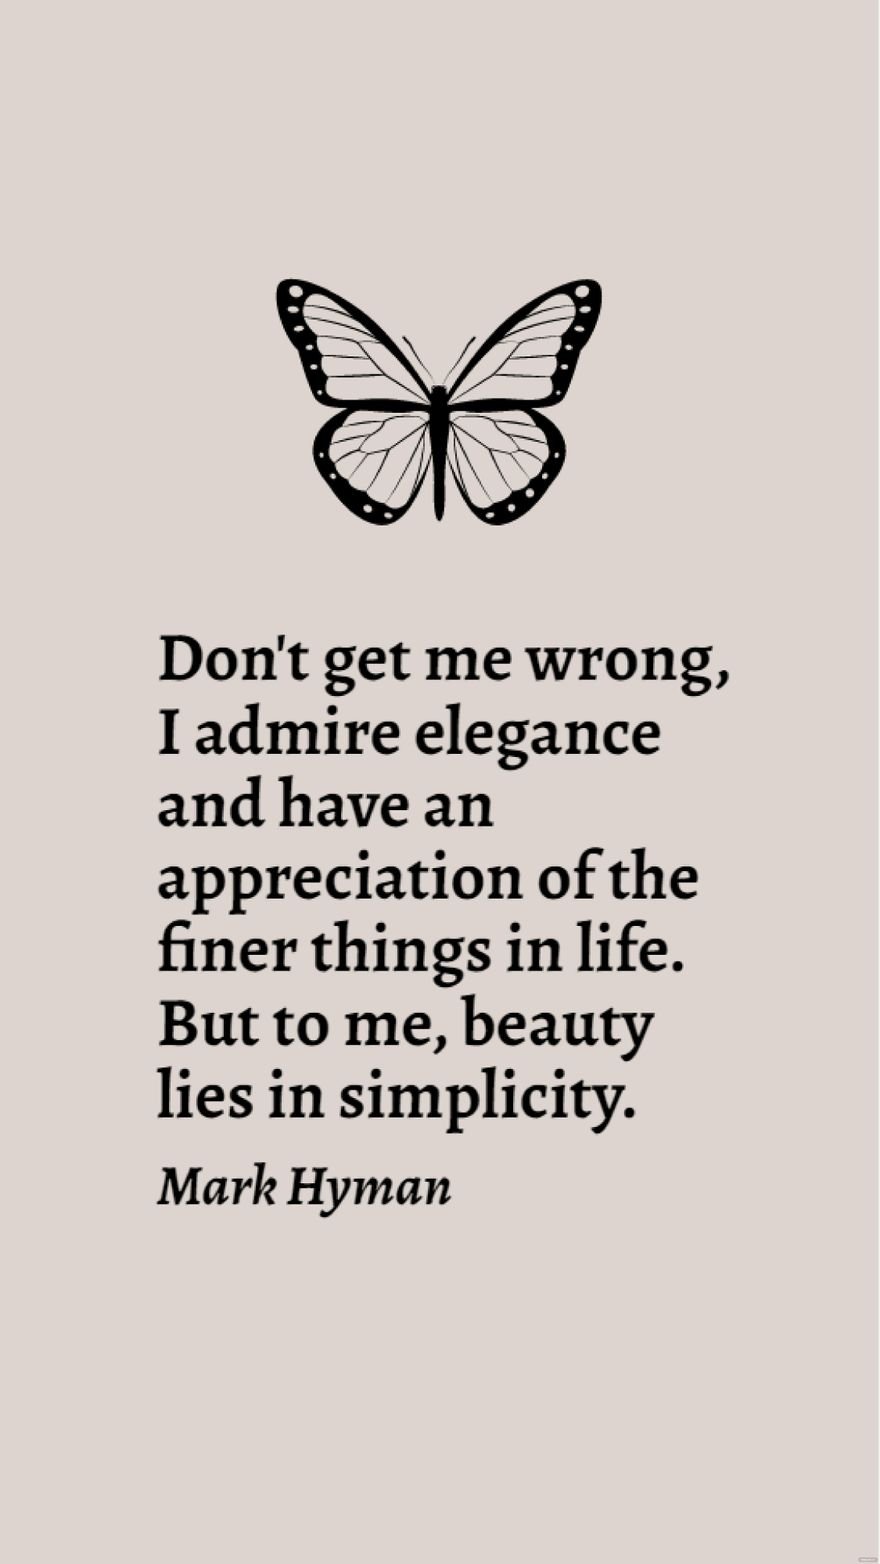 Free Mark Hyman - Don't get me wrong, I admire elegance and have an appreciation of the finer things in life. But to me, beauty lies in simplicity. in JPG